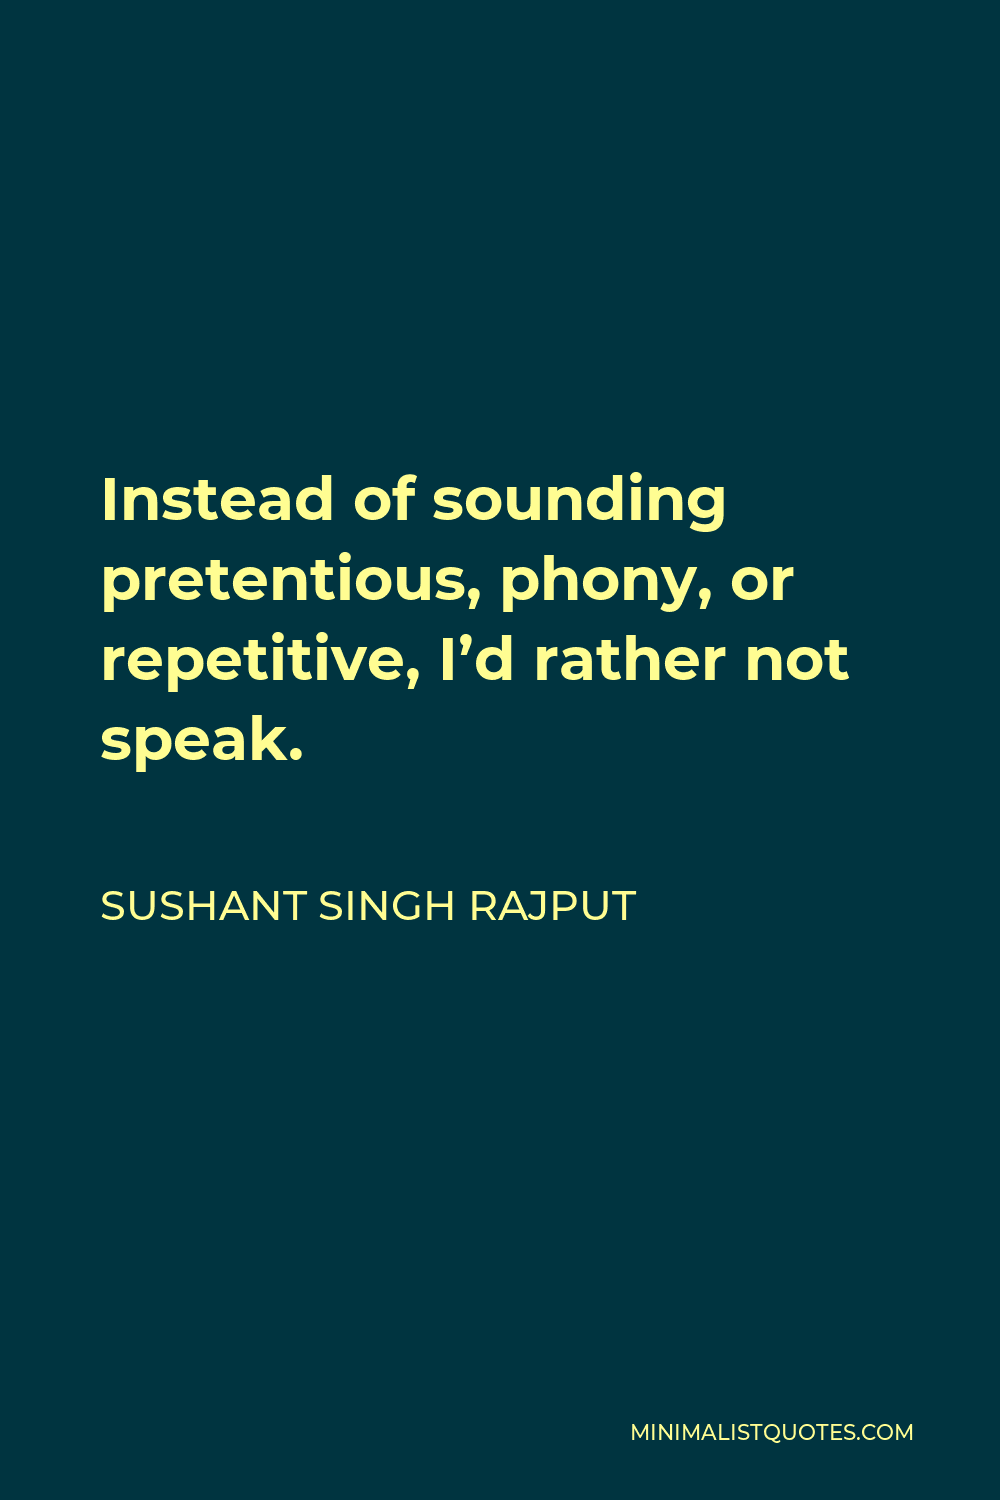 Sushant Singh Rajput Quote - Instead of sounding pretentious, phony, or repetitive, I’d rather not speak.